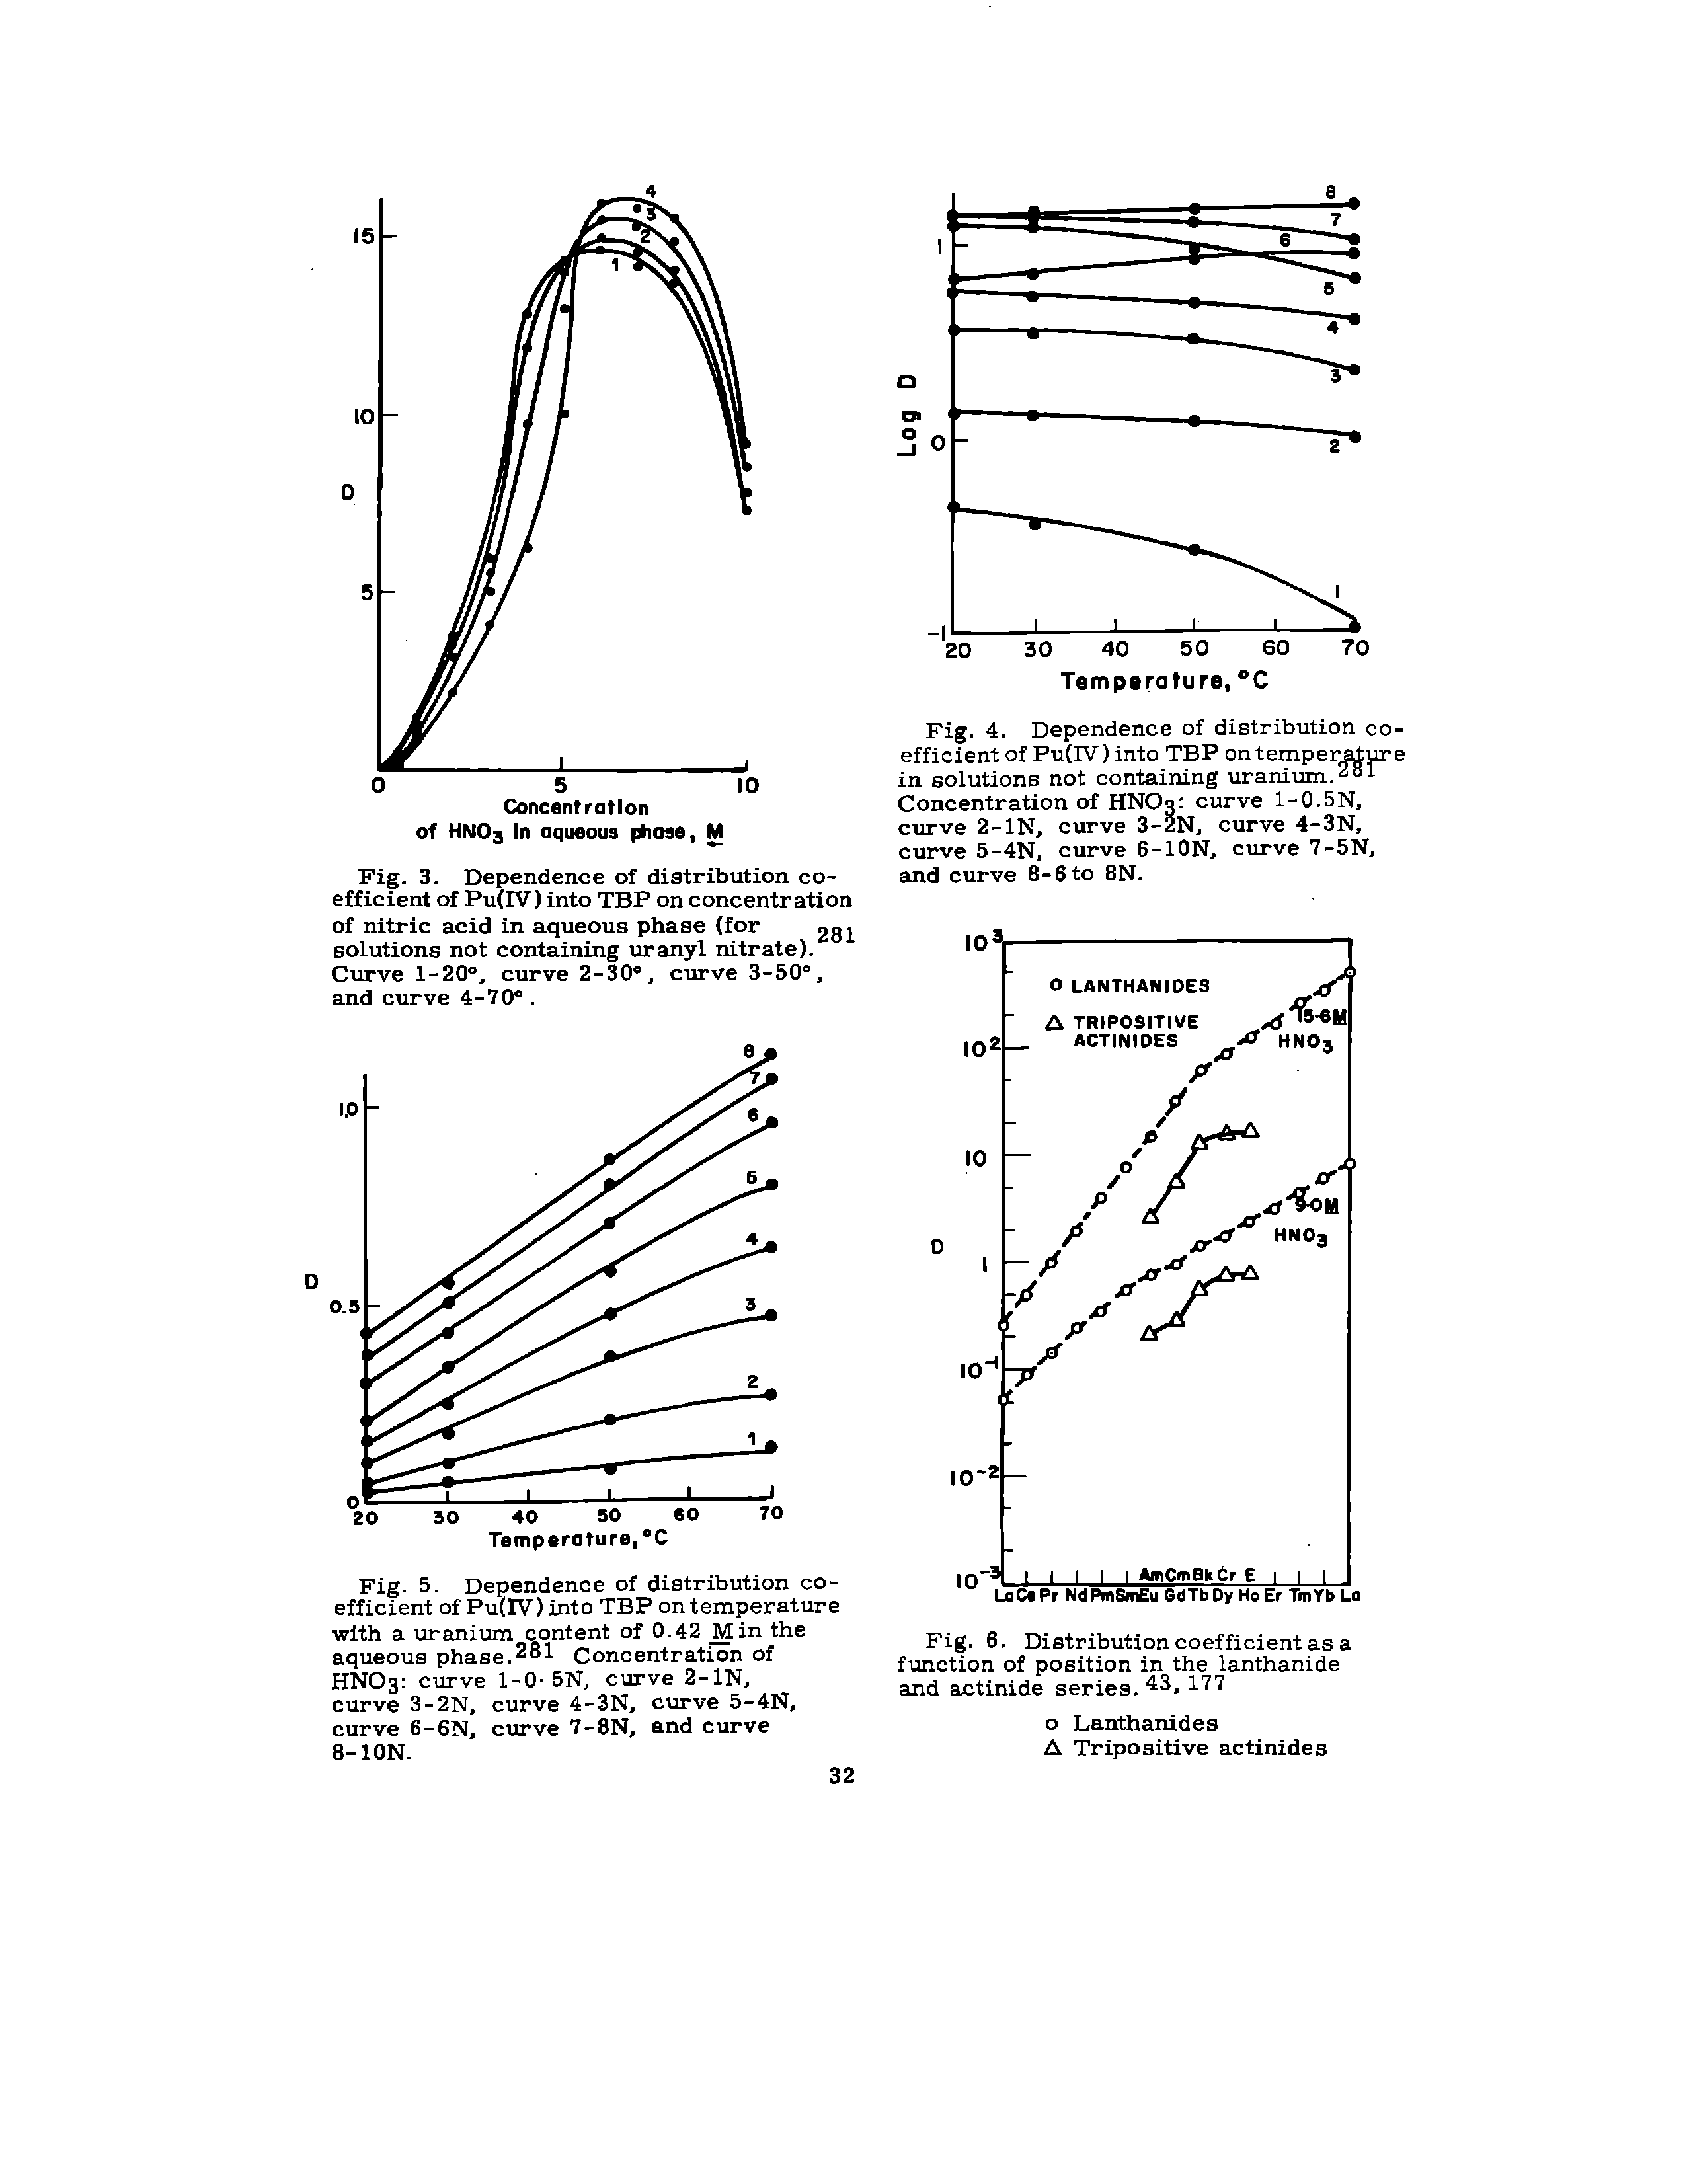 Fig. 3. Dependence of distribution coefficient of Pu(IV) into TBP on concentration of nitric acid in aqueous phase (for 281 solutions not containing uranyl nitrate). Curve 1-20, curve 2-30, curve 3-50°, and curve 4-70. ...